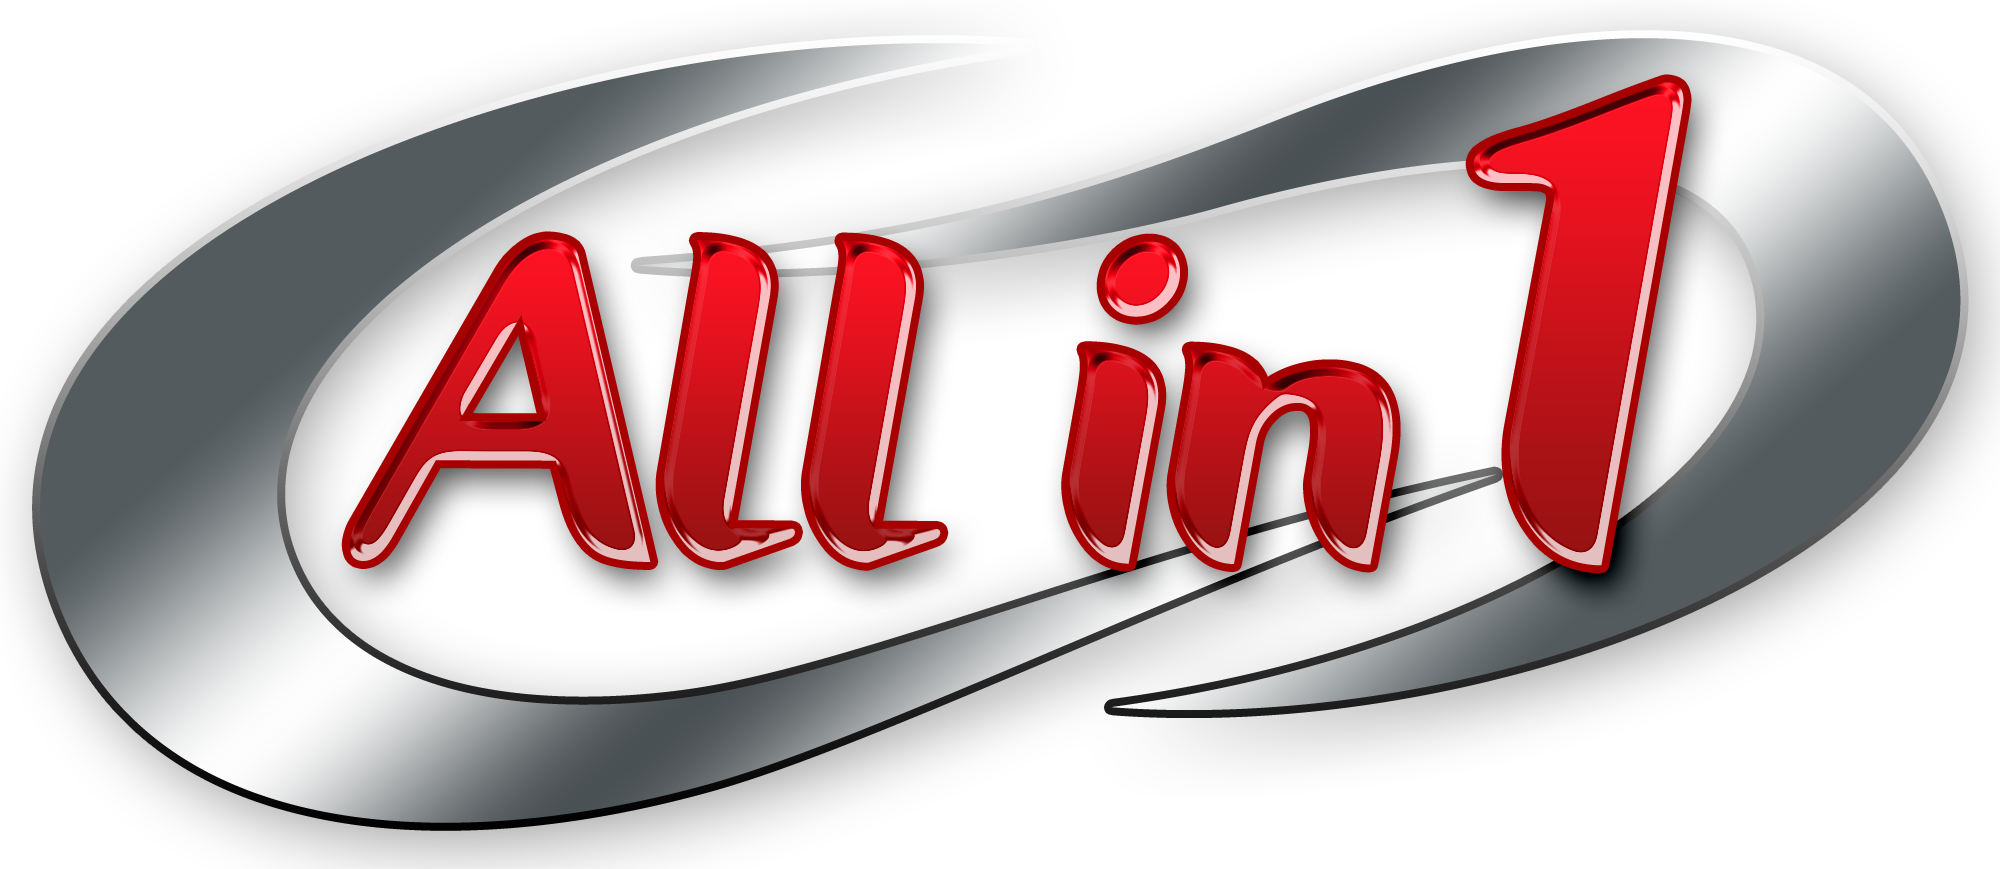 All IN 1 GMBH